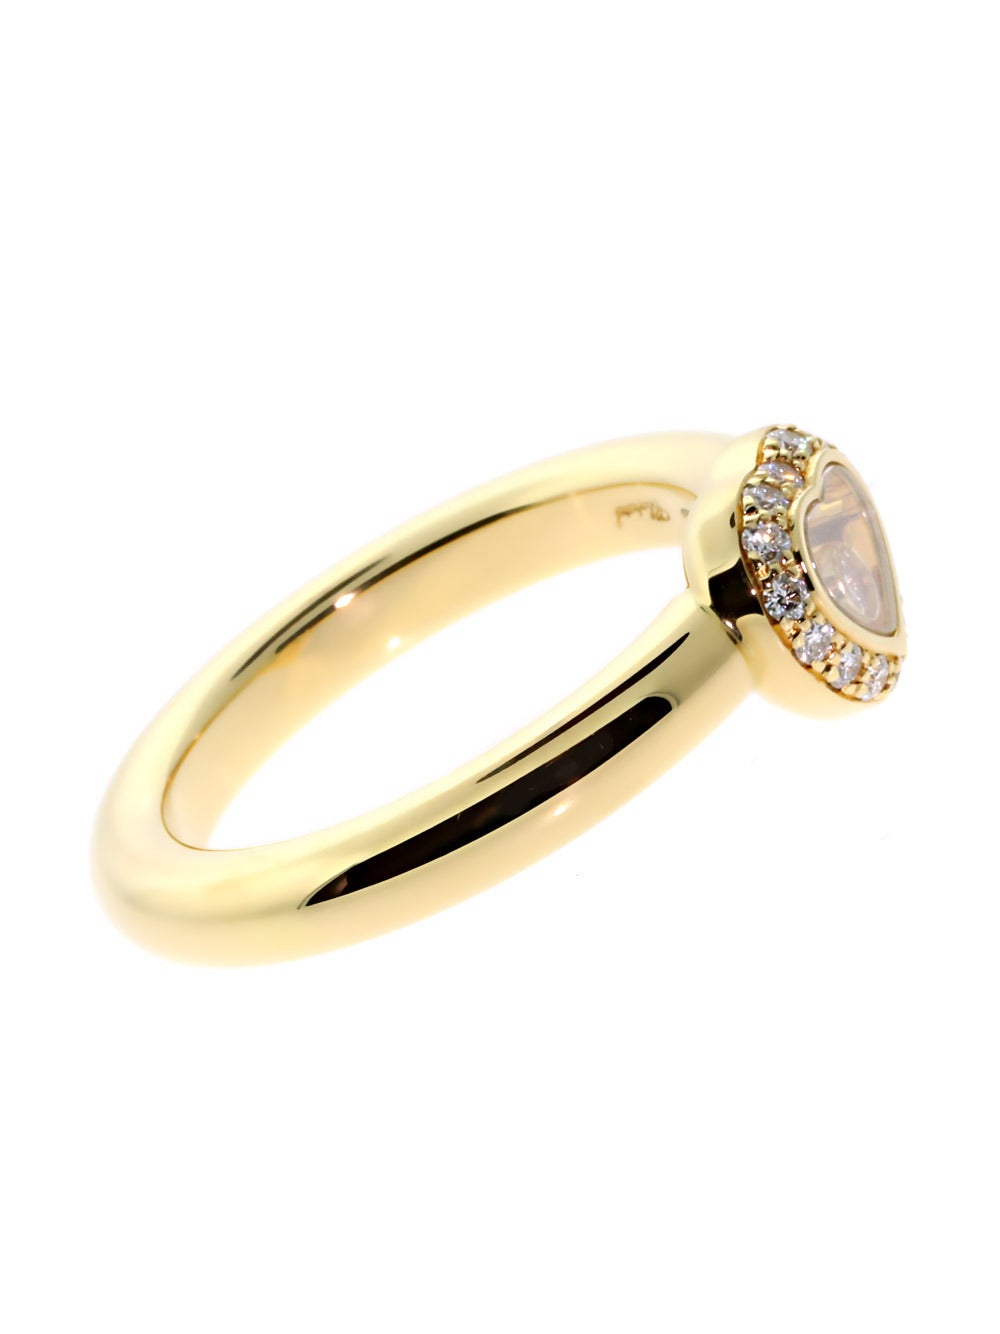 This enchanting 18k Yellow Gold Chopard Ring hits all the right notes and confirms once again why the Happy Diamonds line is so beloved around the world! Vs1 E-F Color Diamonds line the Heart-shaped Motif, which features a transparent core that